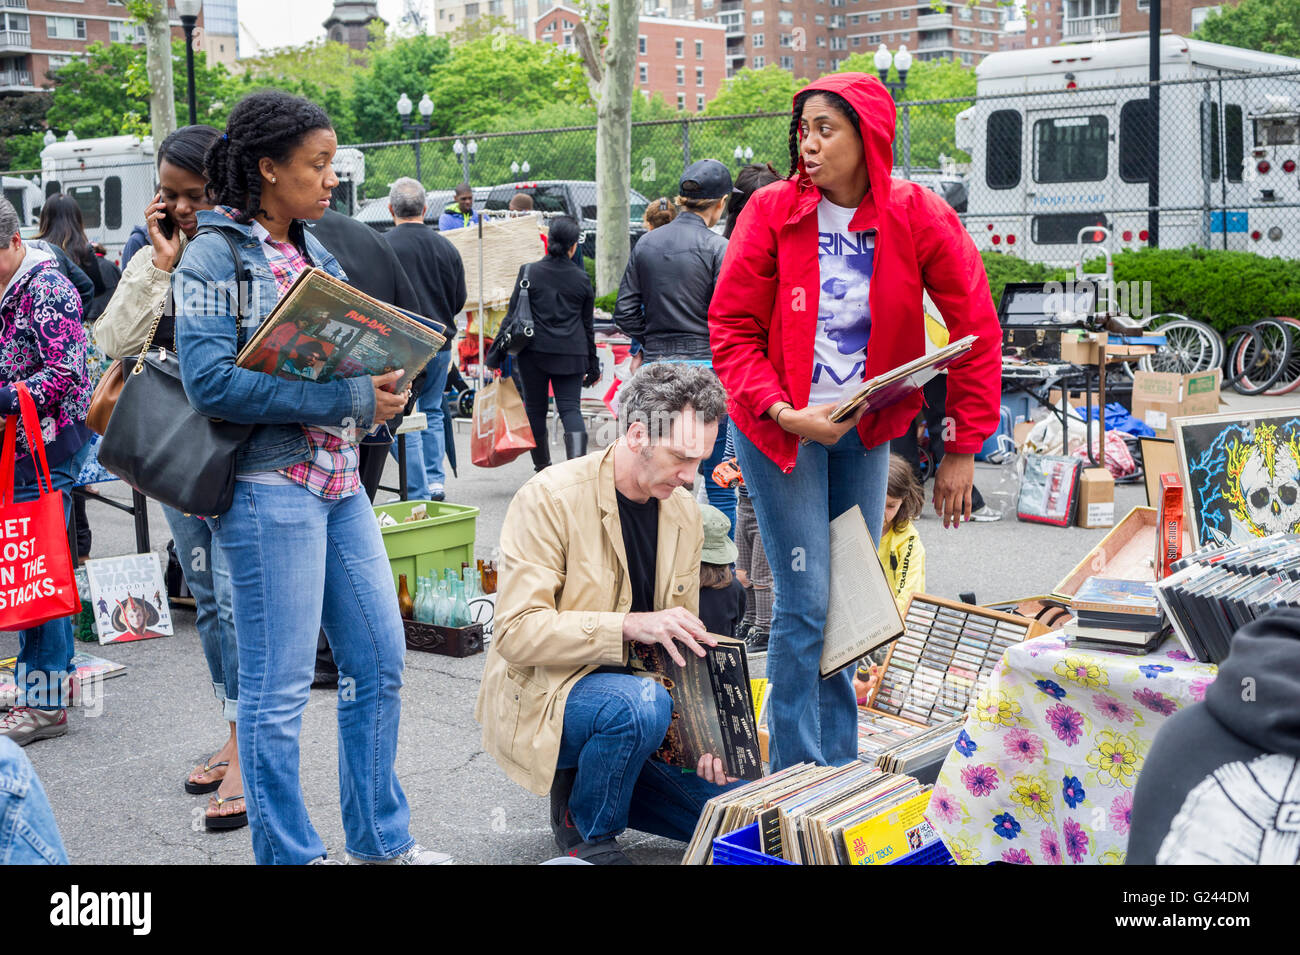 Shoppers search for bargains at the humongous Penn South Flea Market in the New York neighborhood of Chelsea on Saturday, May 21, 2016. The flea market appears like Brigadoon, only once every year, and the residents of the 20 building Penn South cooperatives have a closet cleaning extravaganza. Shoppers from around the city come to the flea market which attracts thousands passing through.  (© Richard B. Levine) Stock Photo